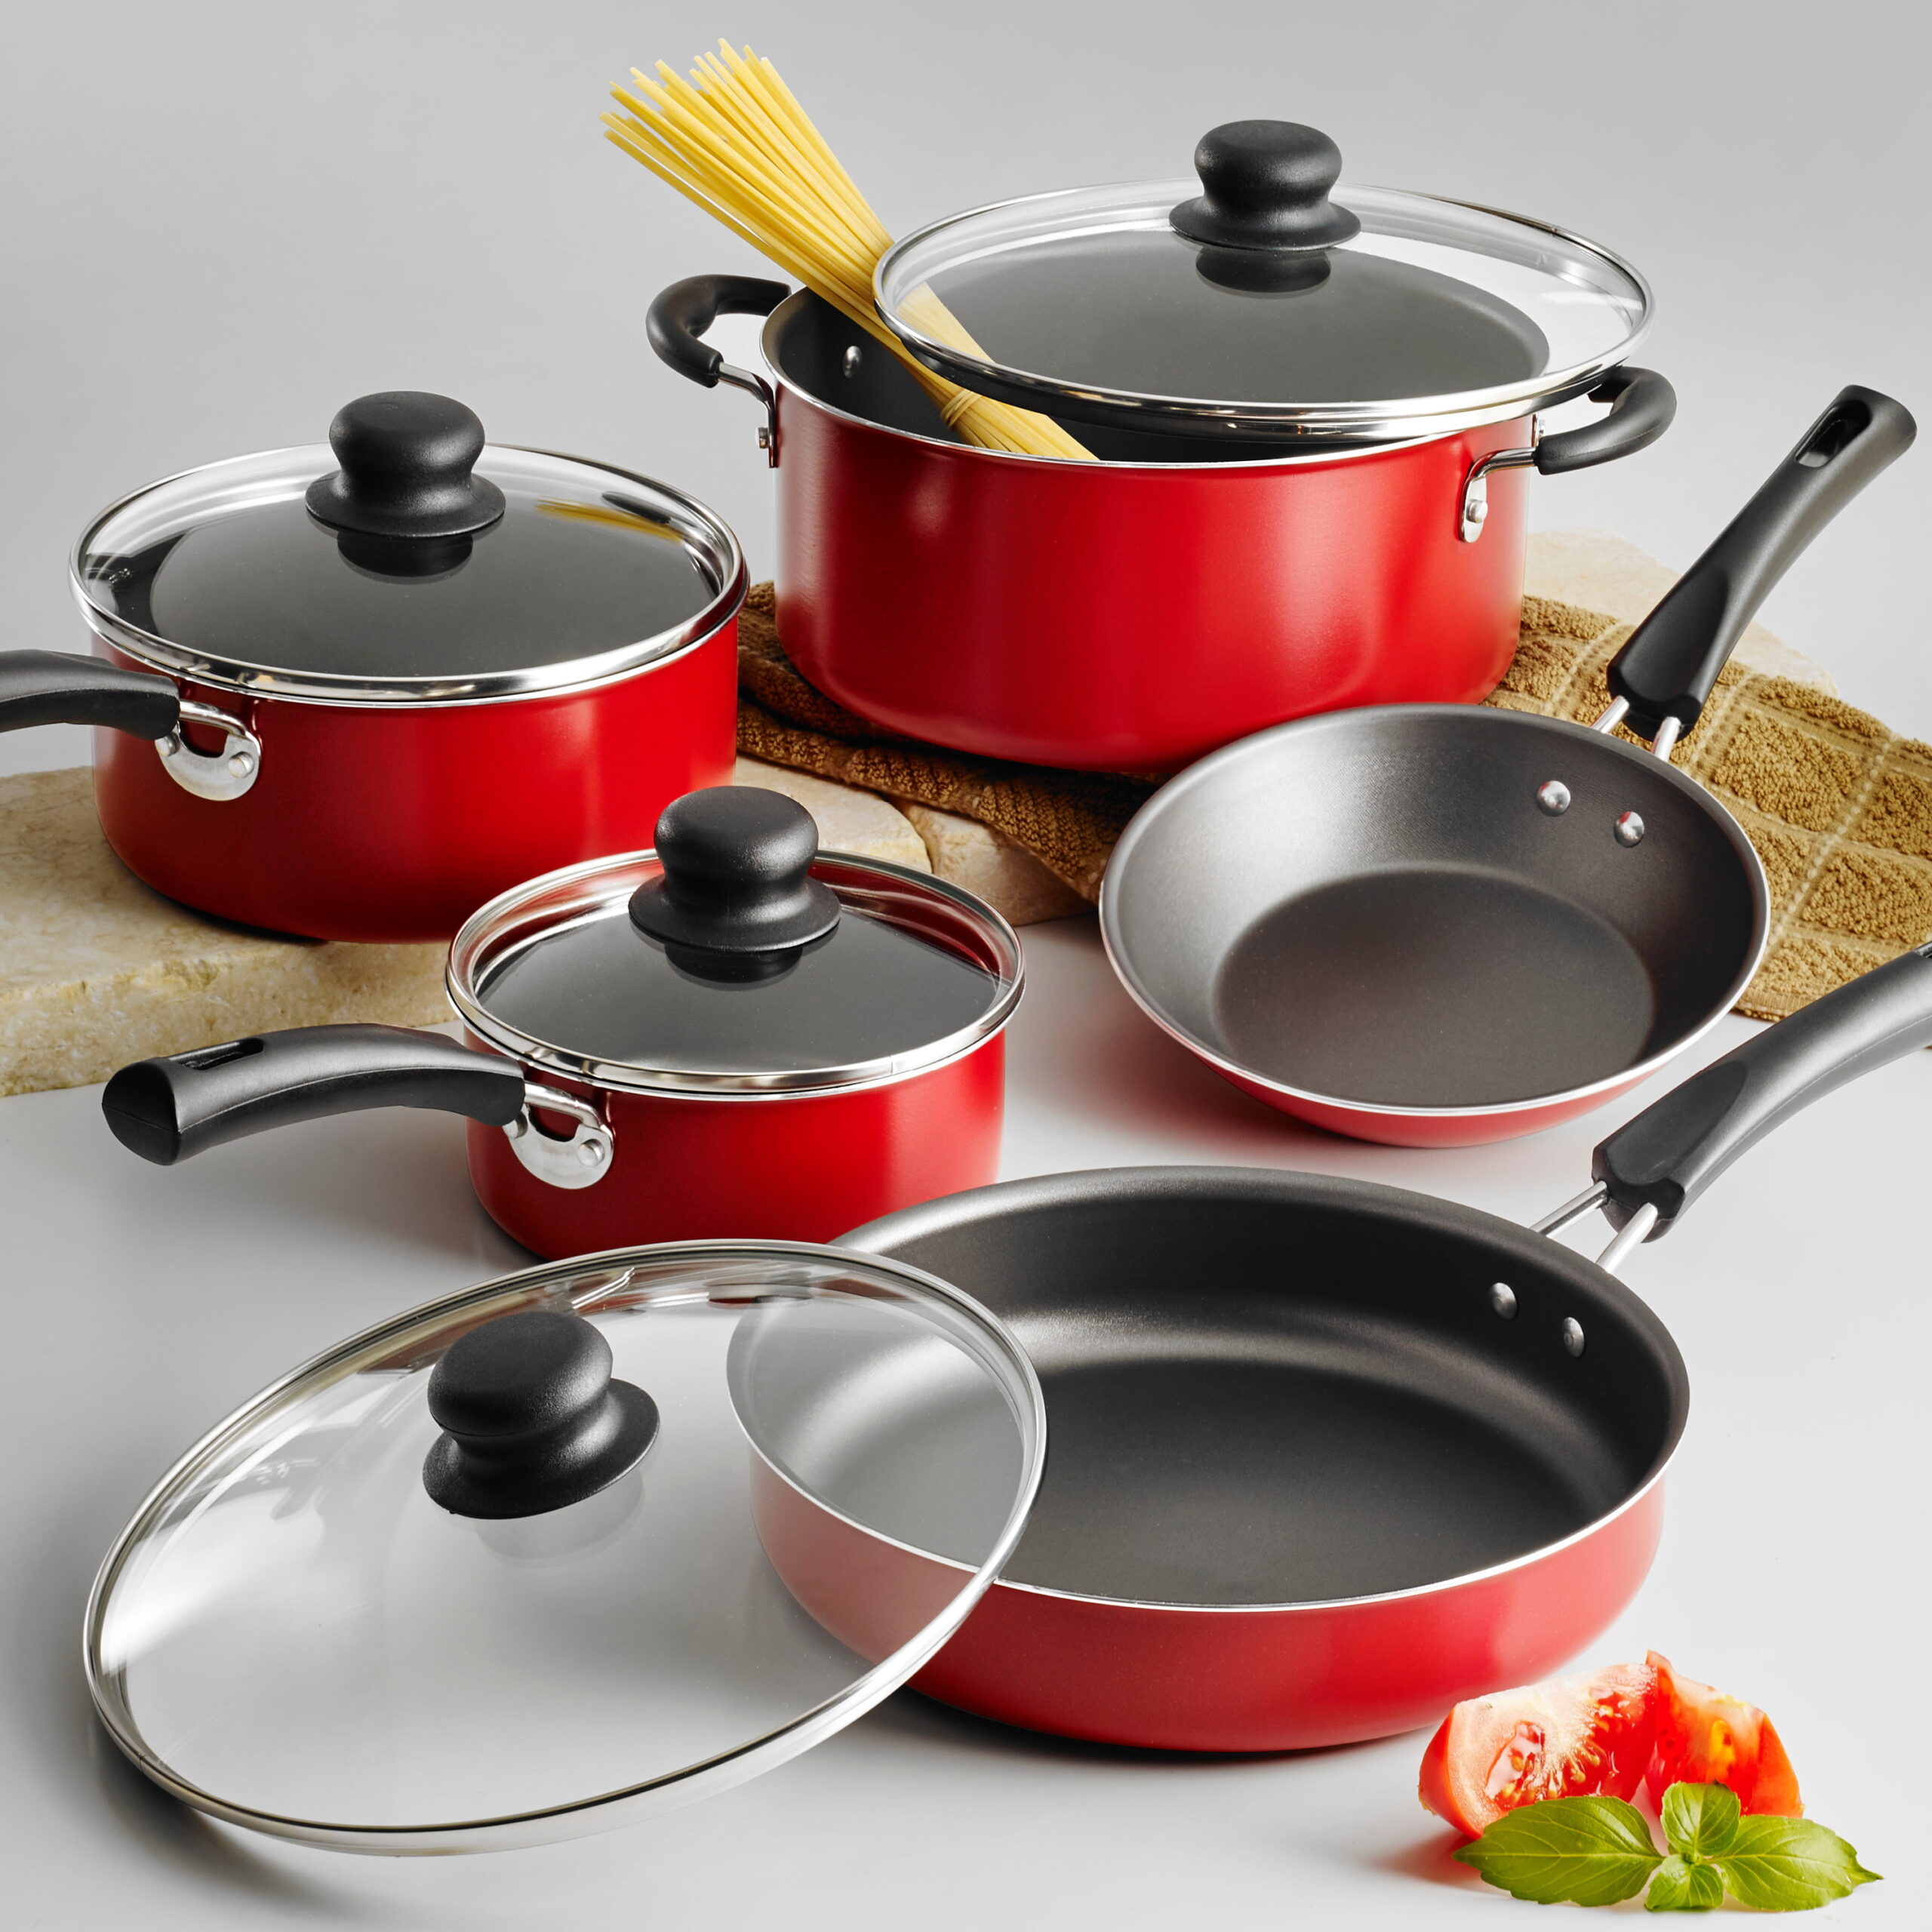 Tramontina 9-Piece Stainless-Steel Cookware Set 